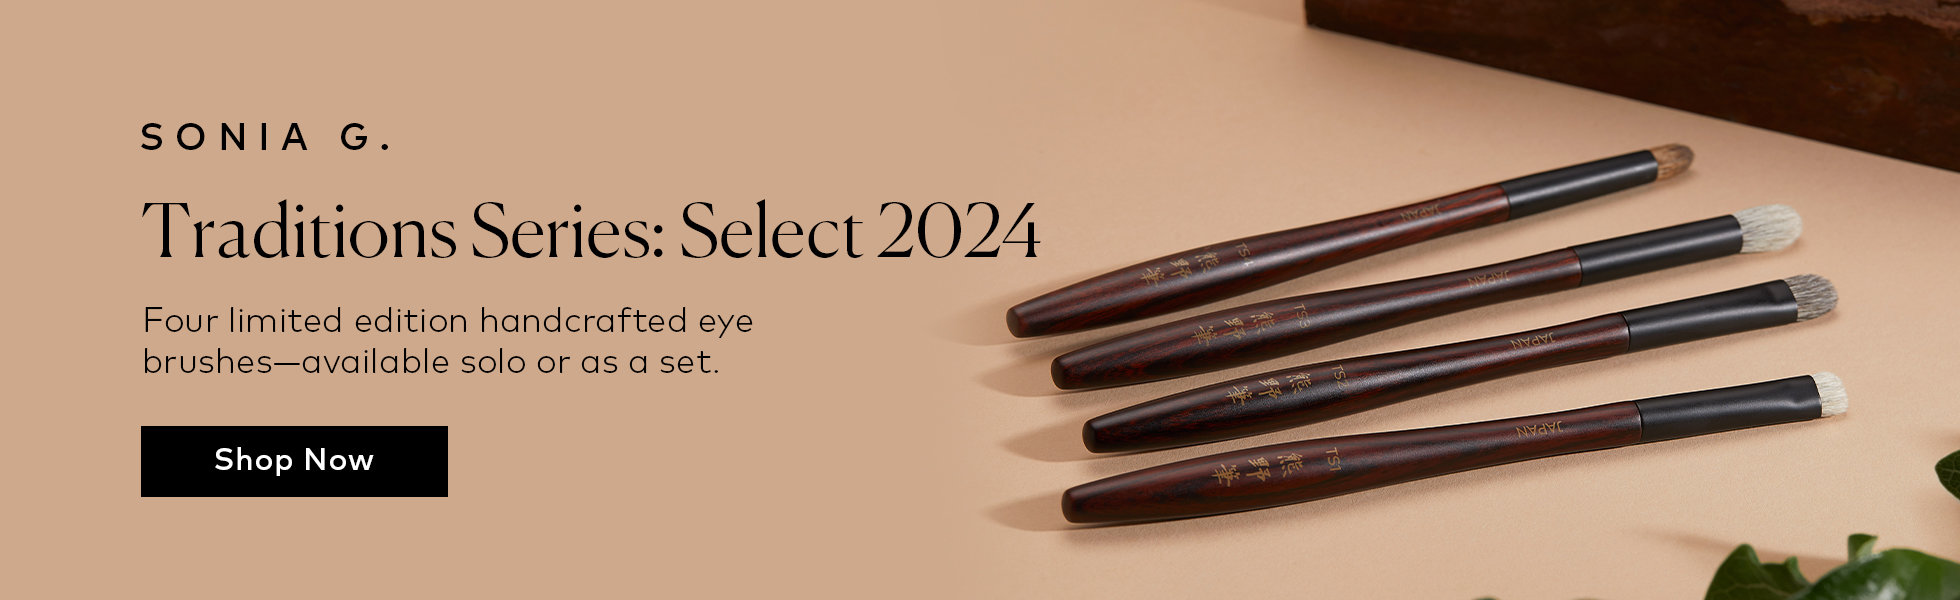 Shop the Sonia G. Traditions Series: Select 2024 on Beautylish.com!